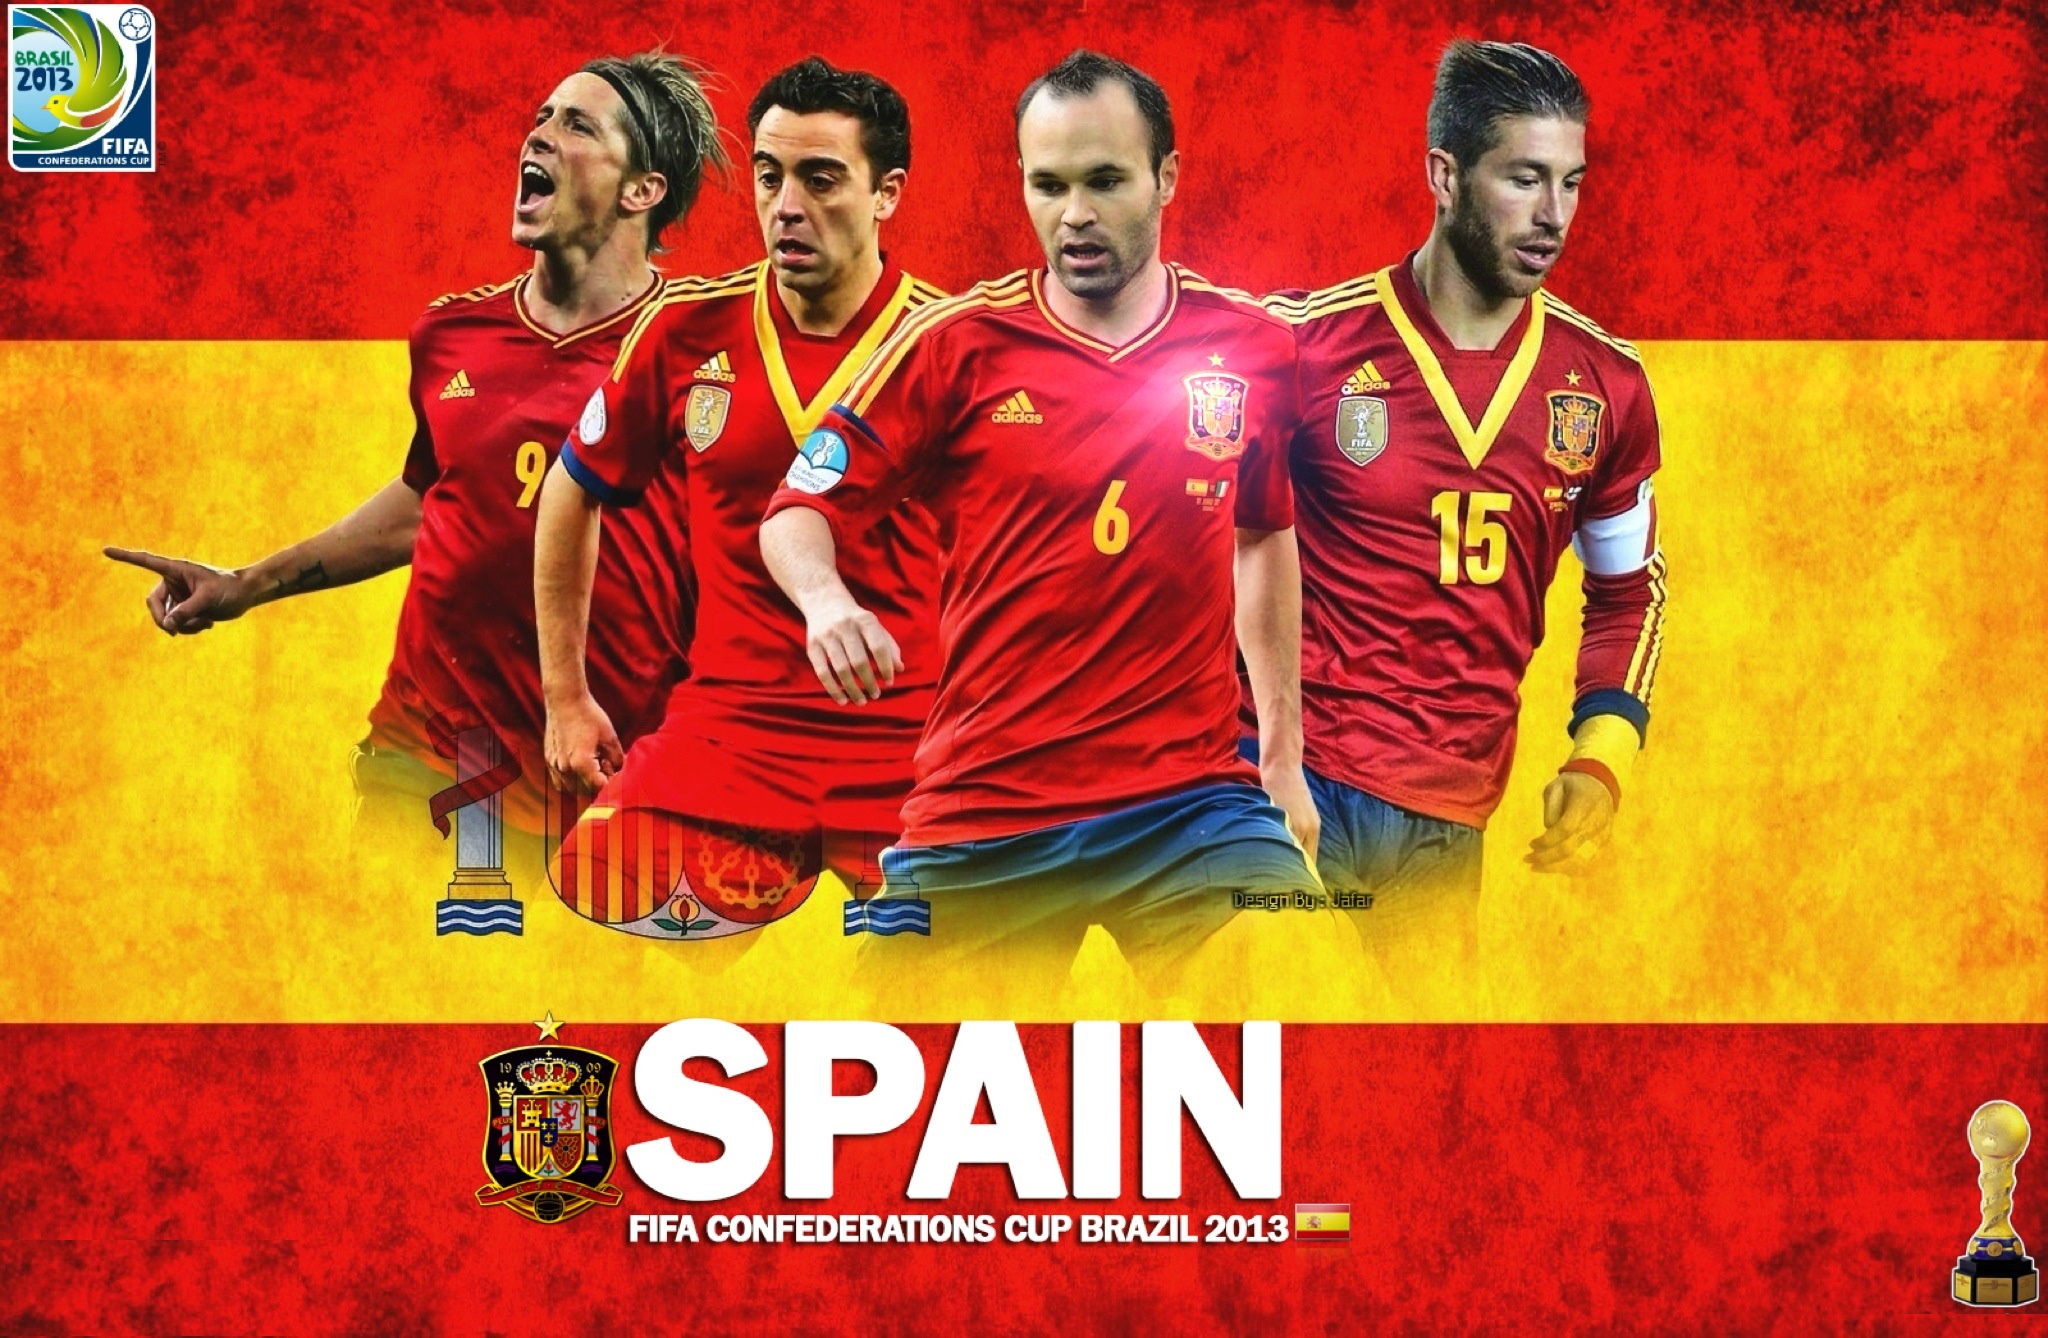 2048x1338 Spain Soccer Team Wallpapers - Wallpaper Cave | Images Wallpapers |  Pinterest | Spain soccer, Team wallpaper and Wallpaper